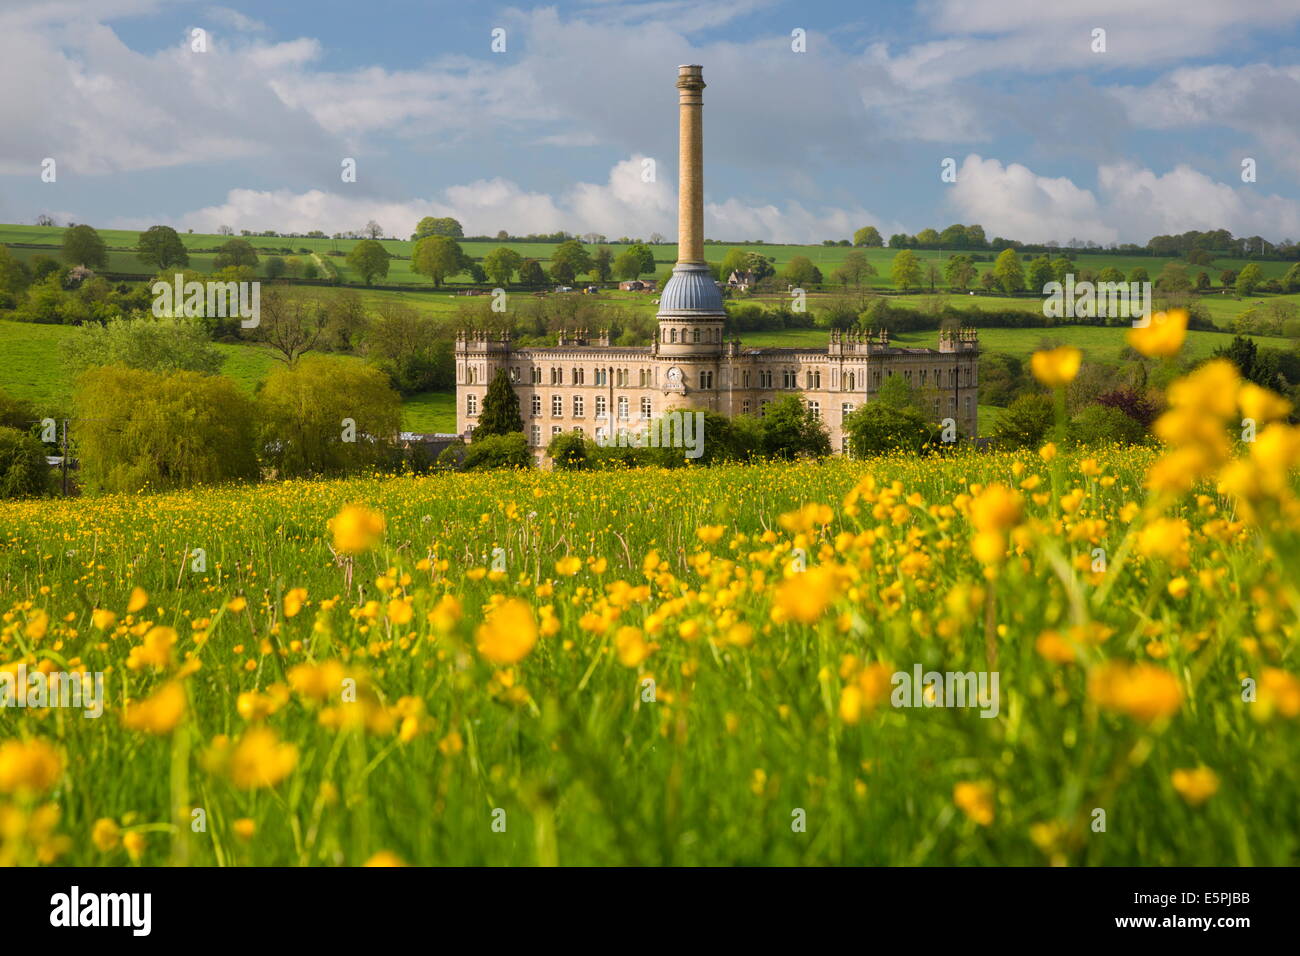 Bliss Moulin avec renoncules, Cotswolds, Chipping Norton, Oxfordshire, Angleterre, Royaume-Uni, Europe Banque D'Images